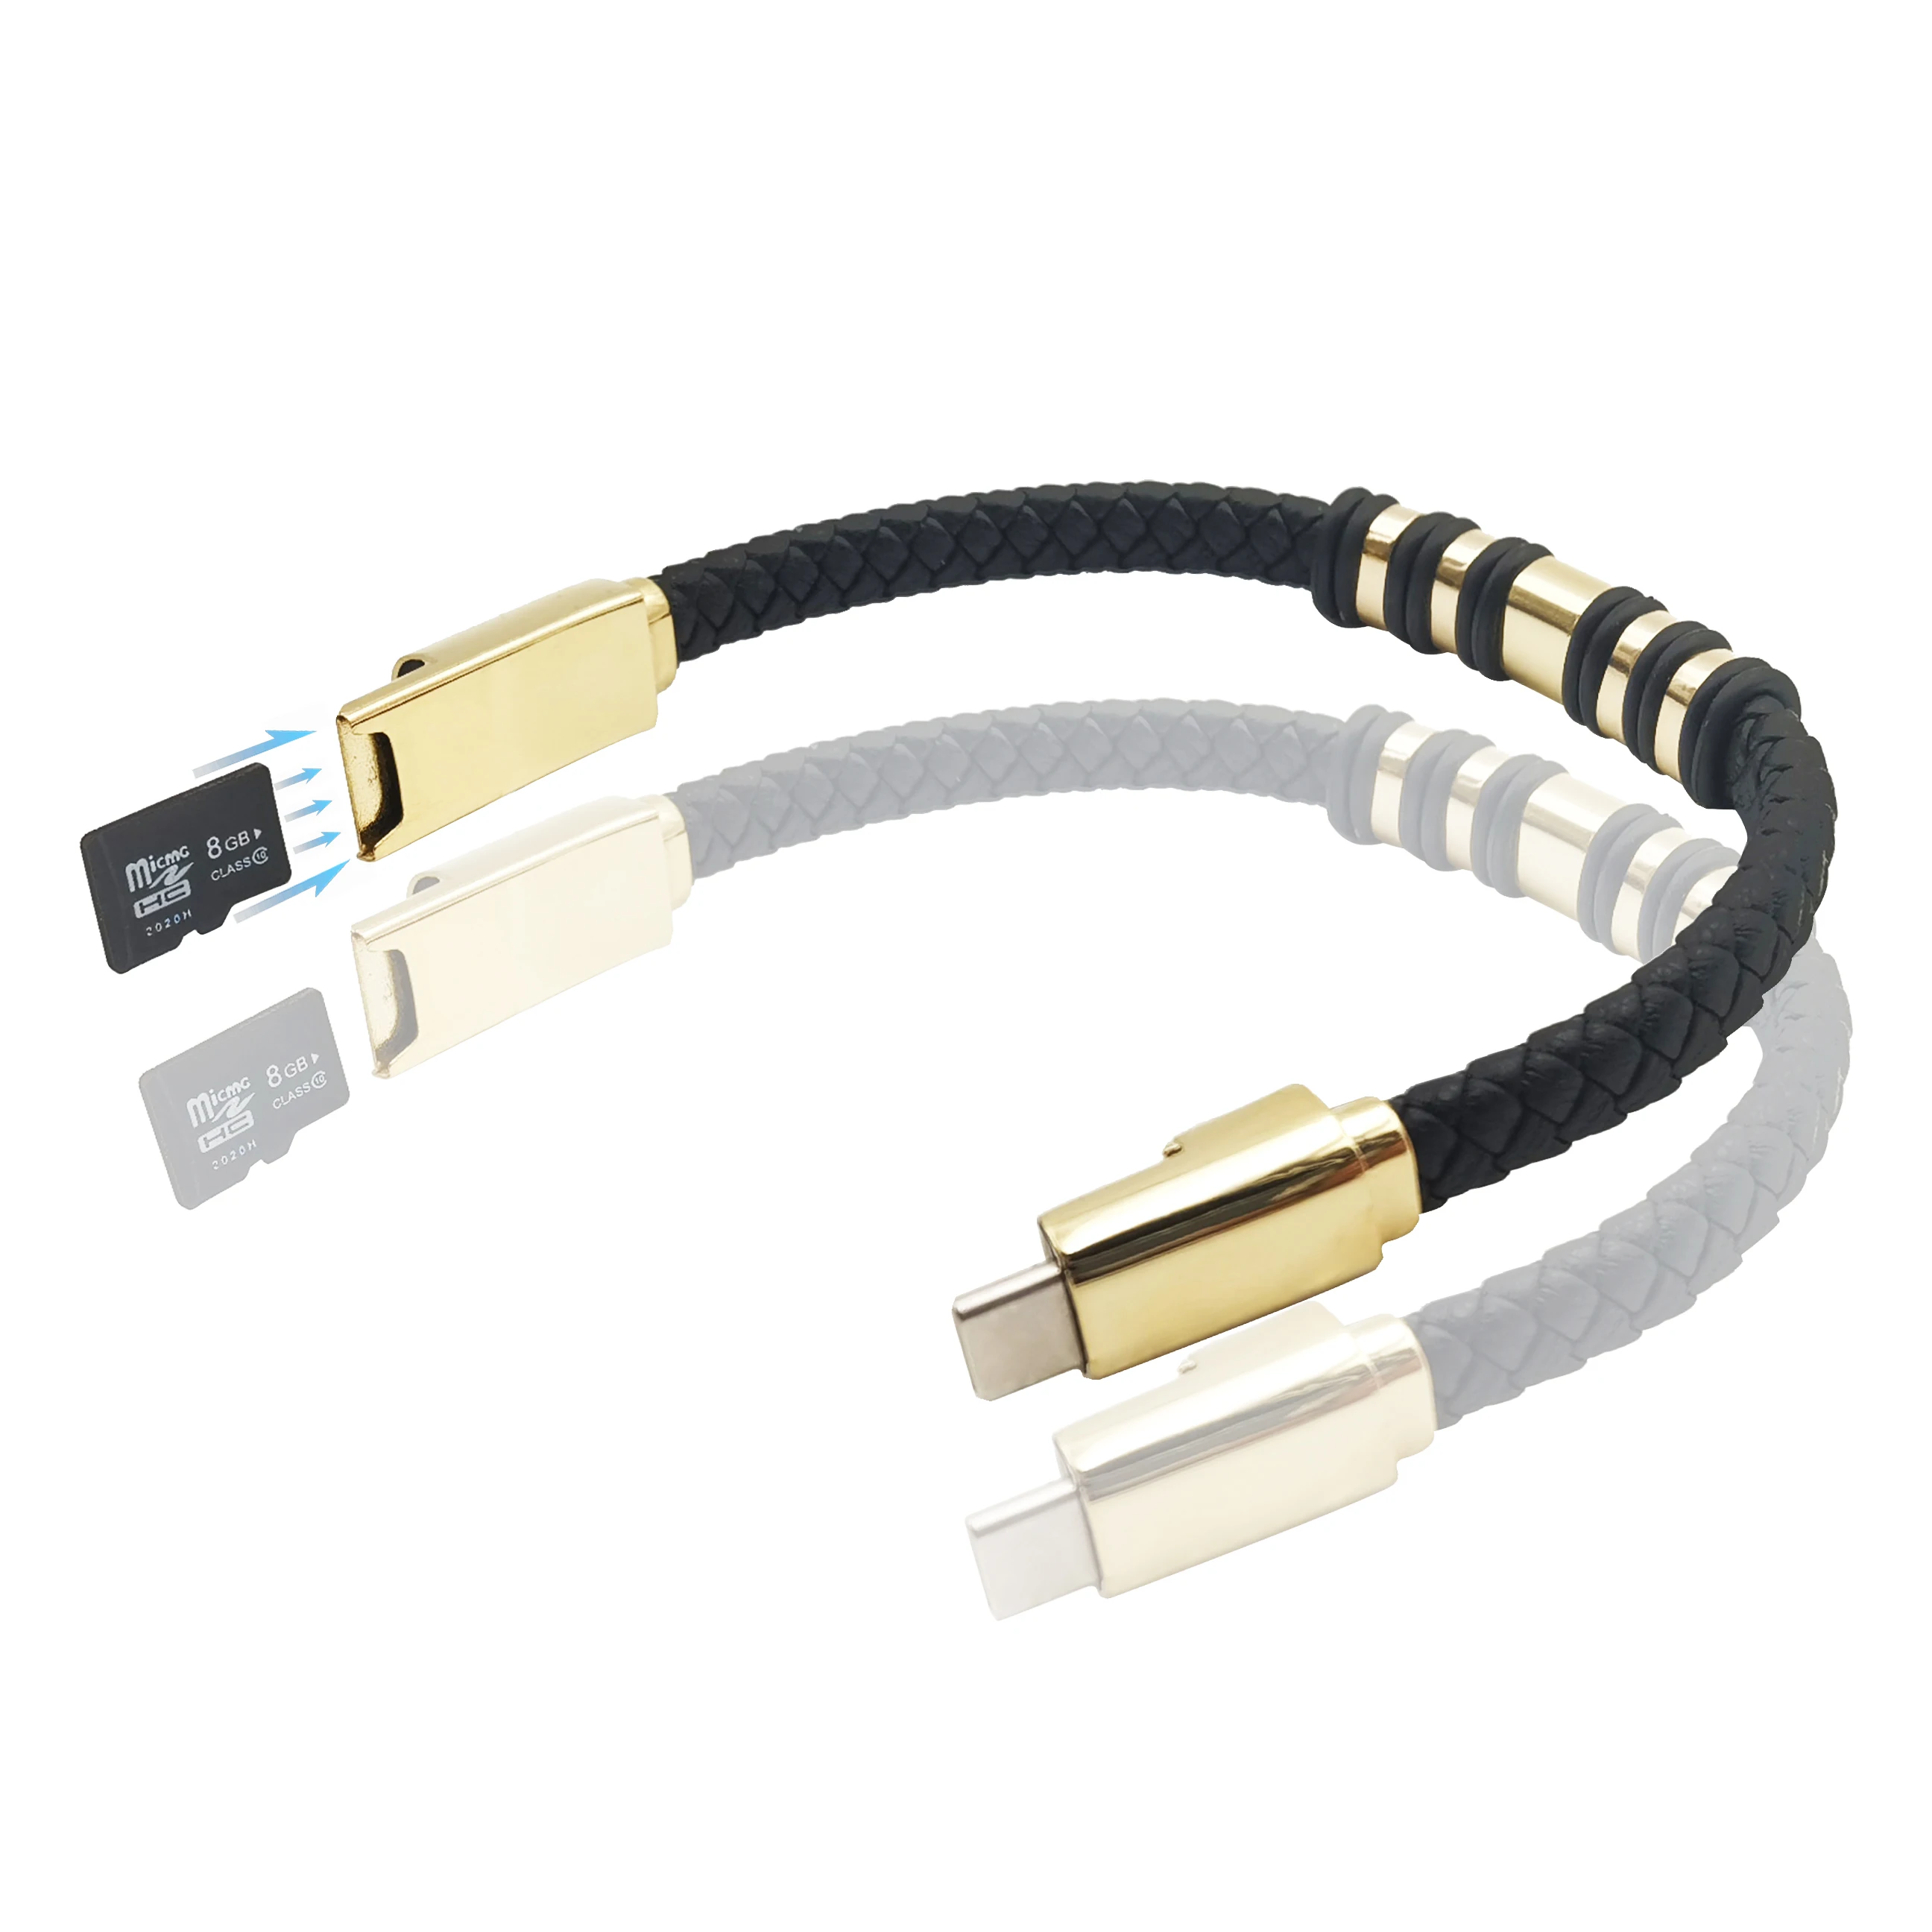 Auzev Bracelet Lightning Cable Data Charging Cord for iPhone - YouTube